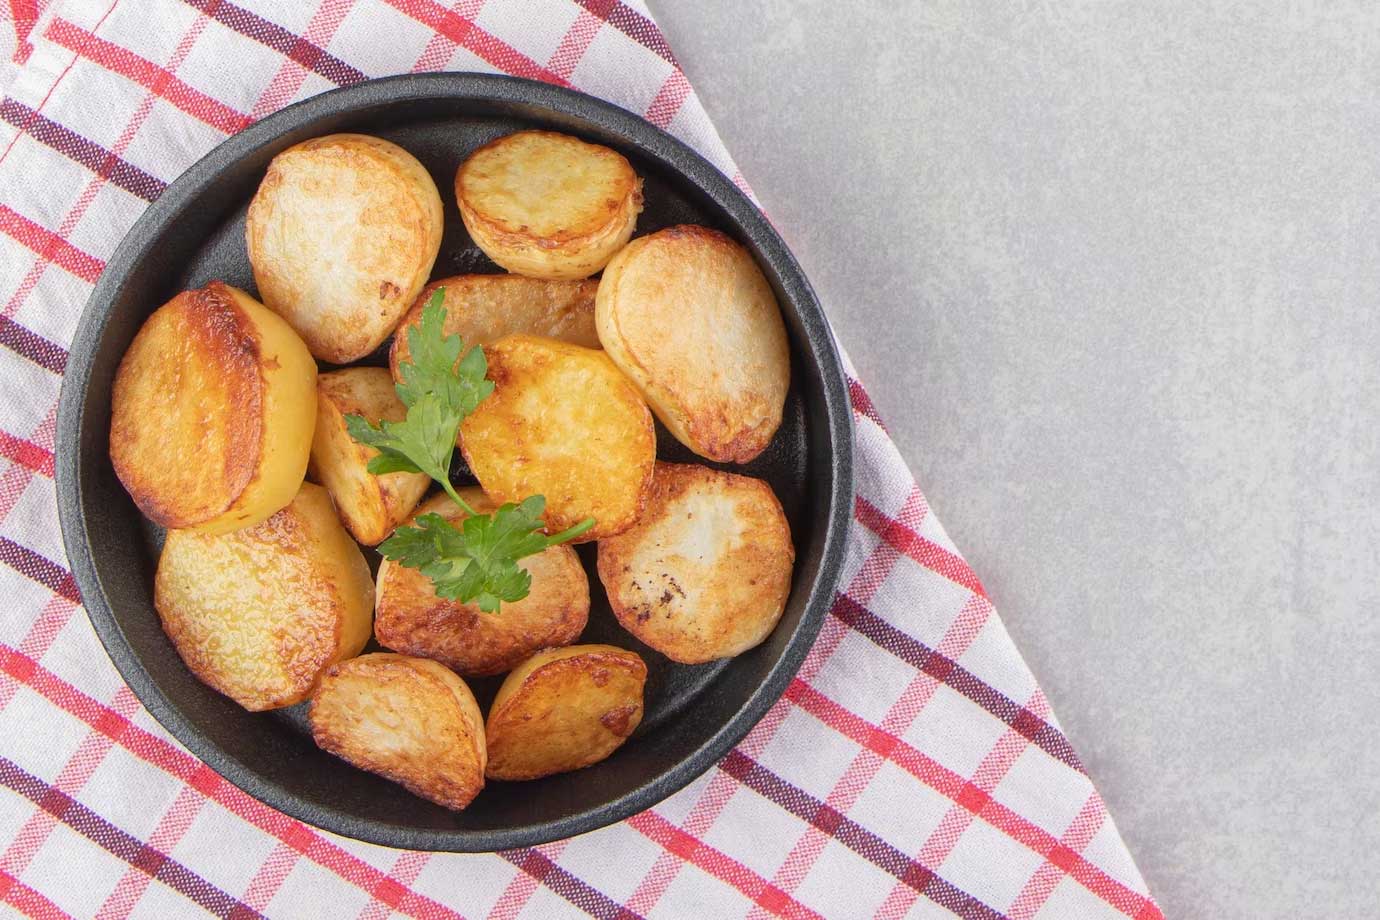 cooked and cooled potatoes